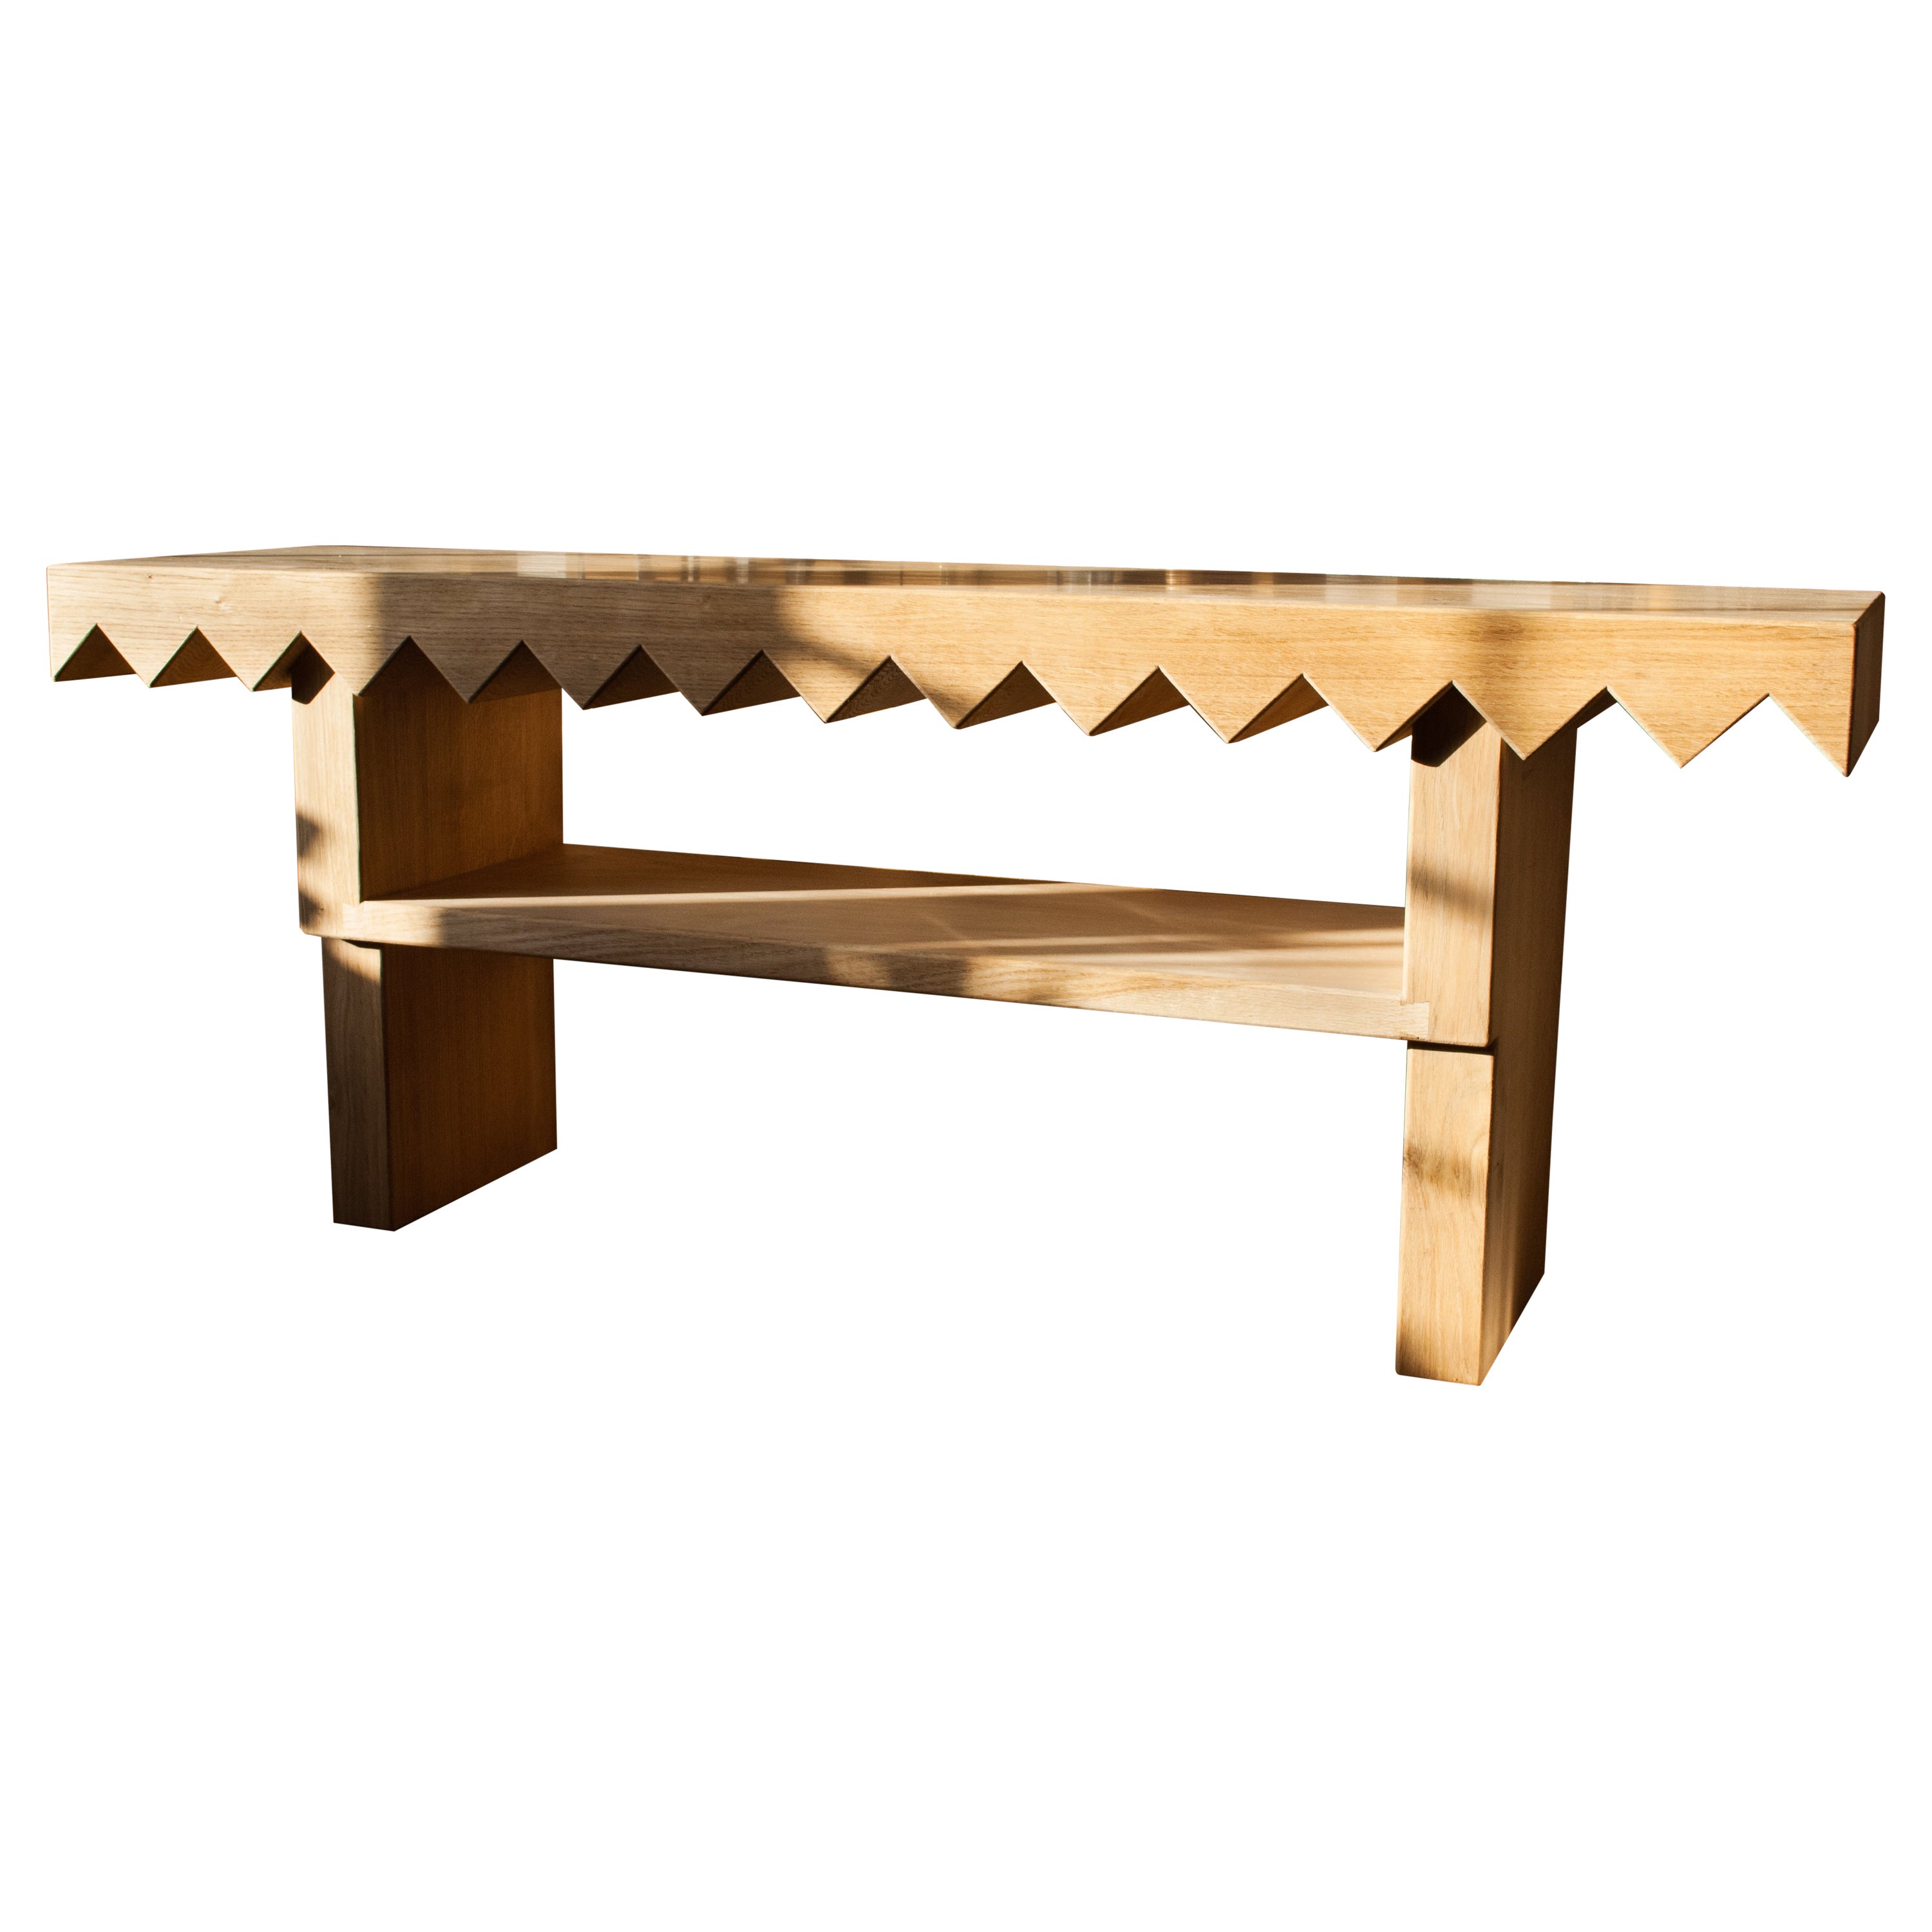 Sawtooth Bench in Solid English Oak, Designed and Handmade by Loose Fit For Sale